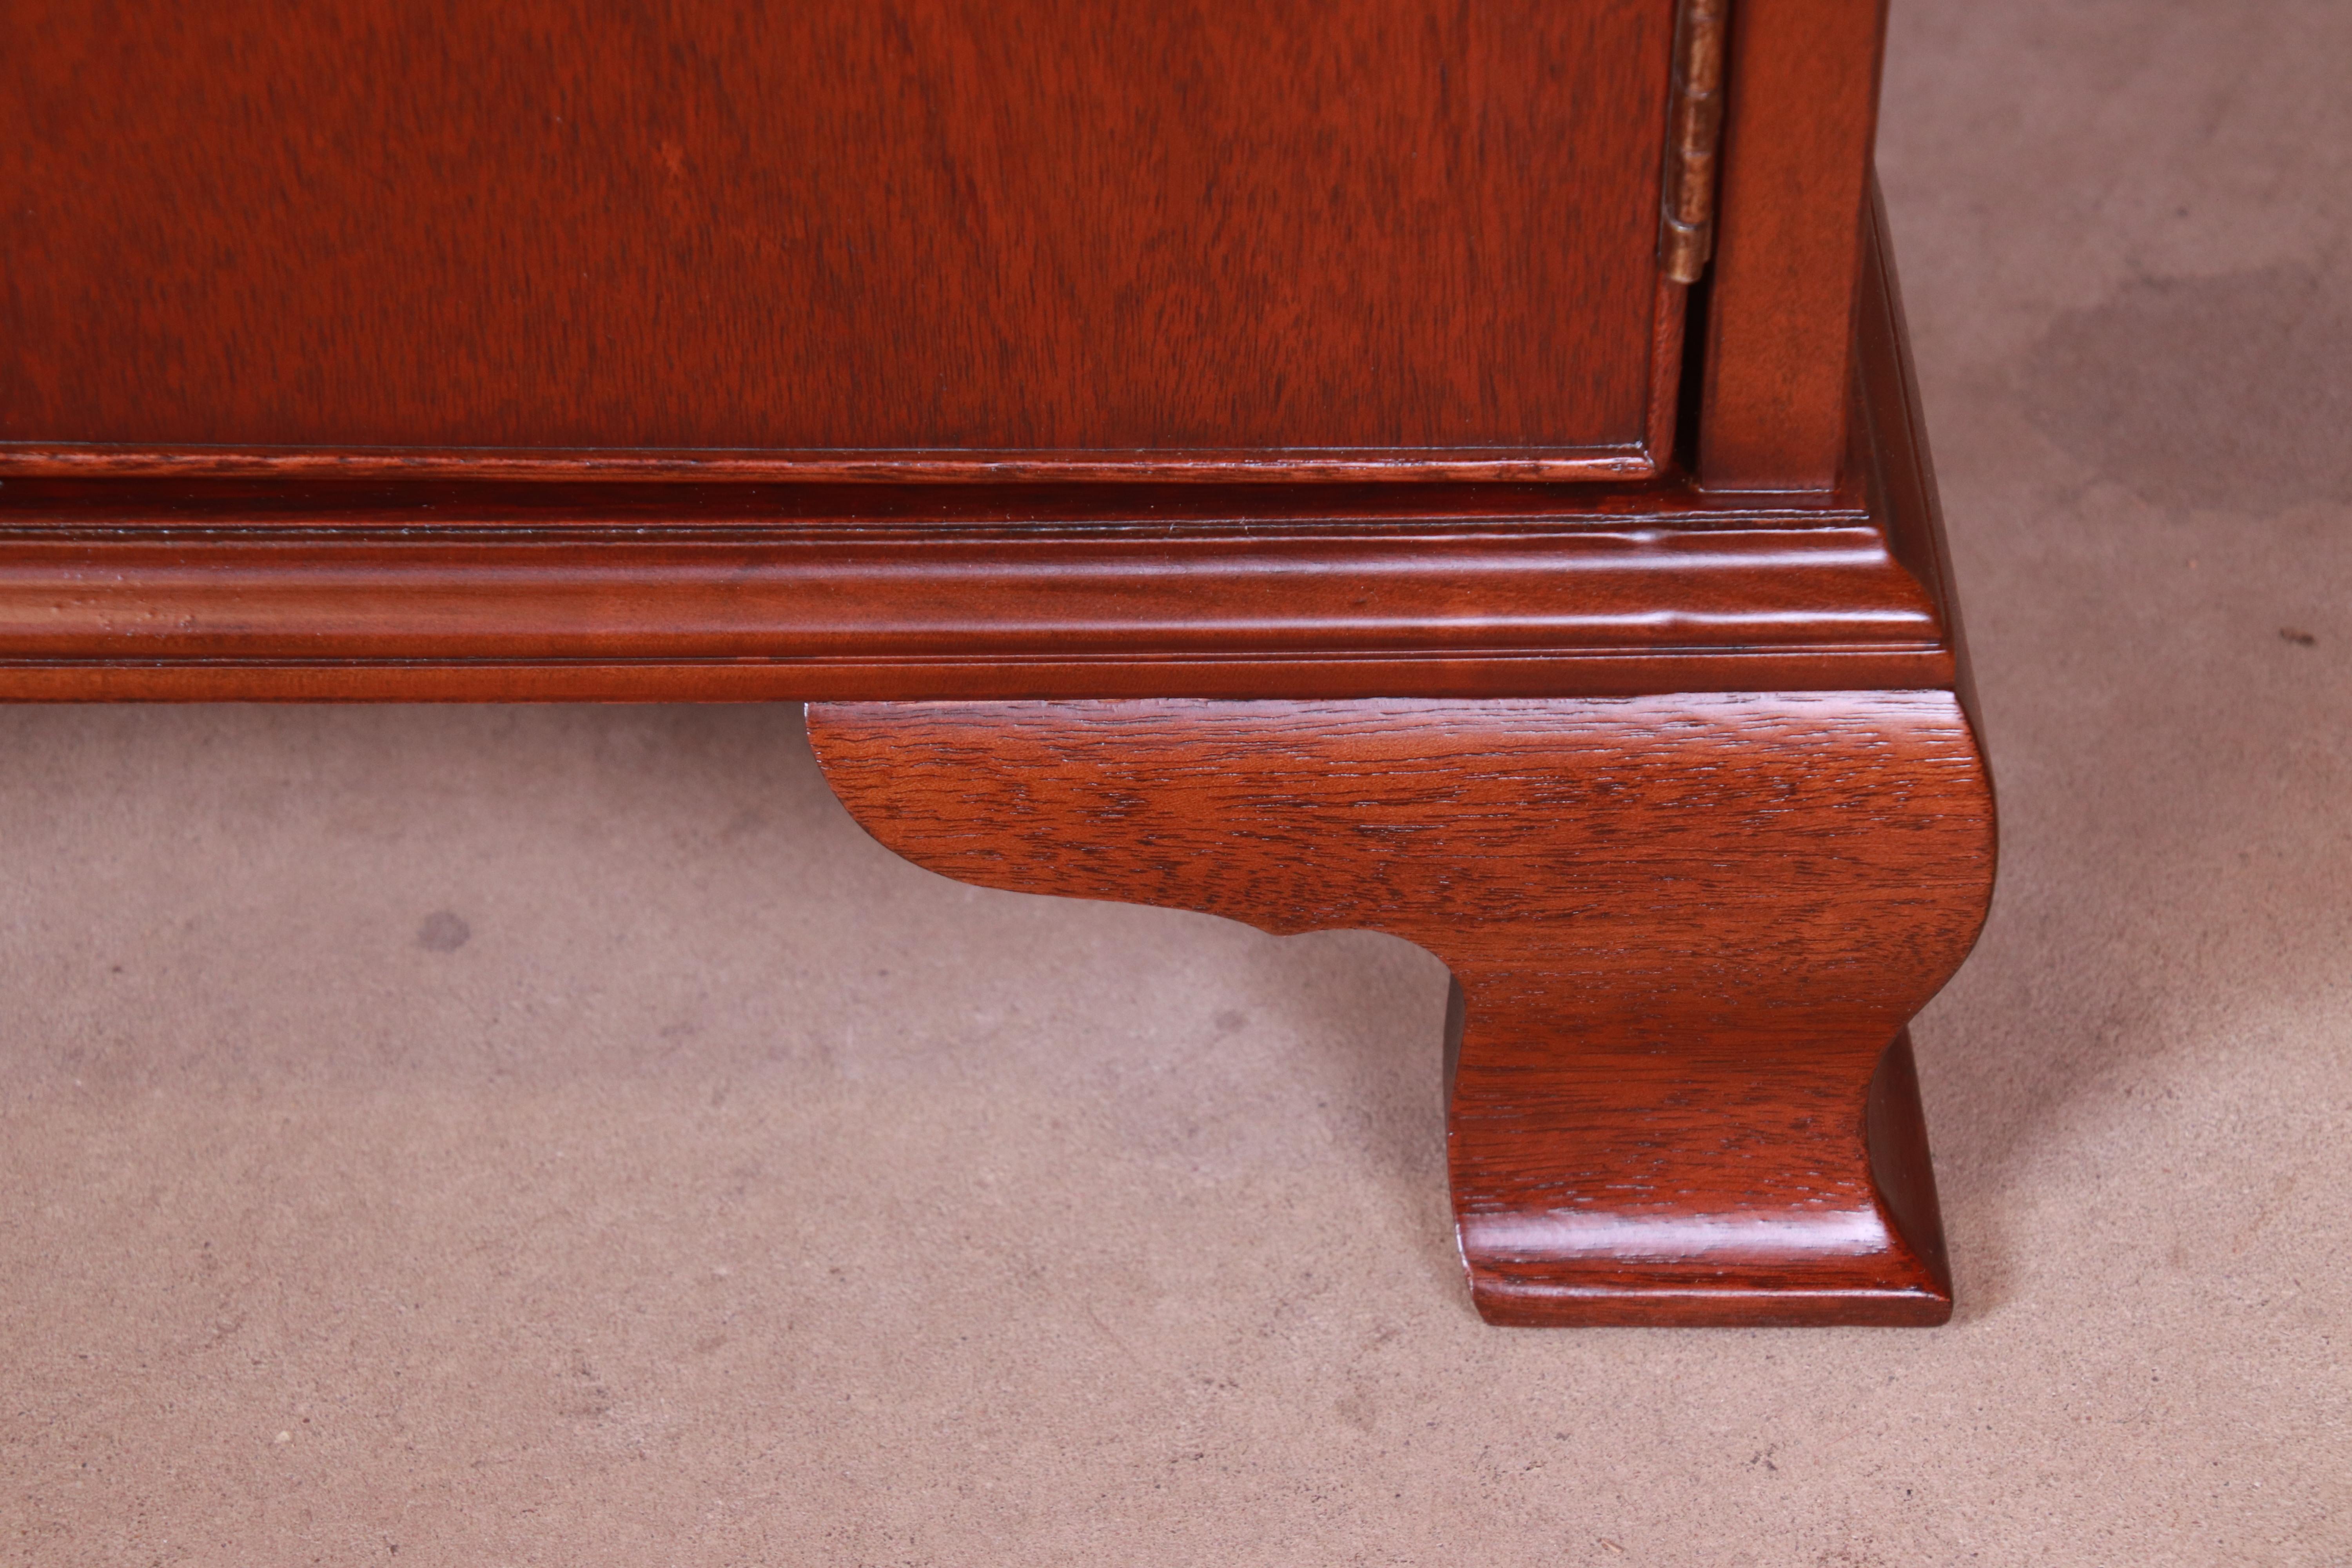 Baker Furniture Georgian Carved Mahogany Nightstands, Newly Refinished For Sale 9